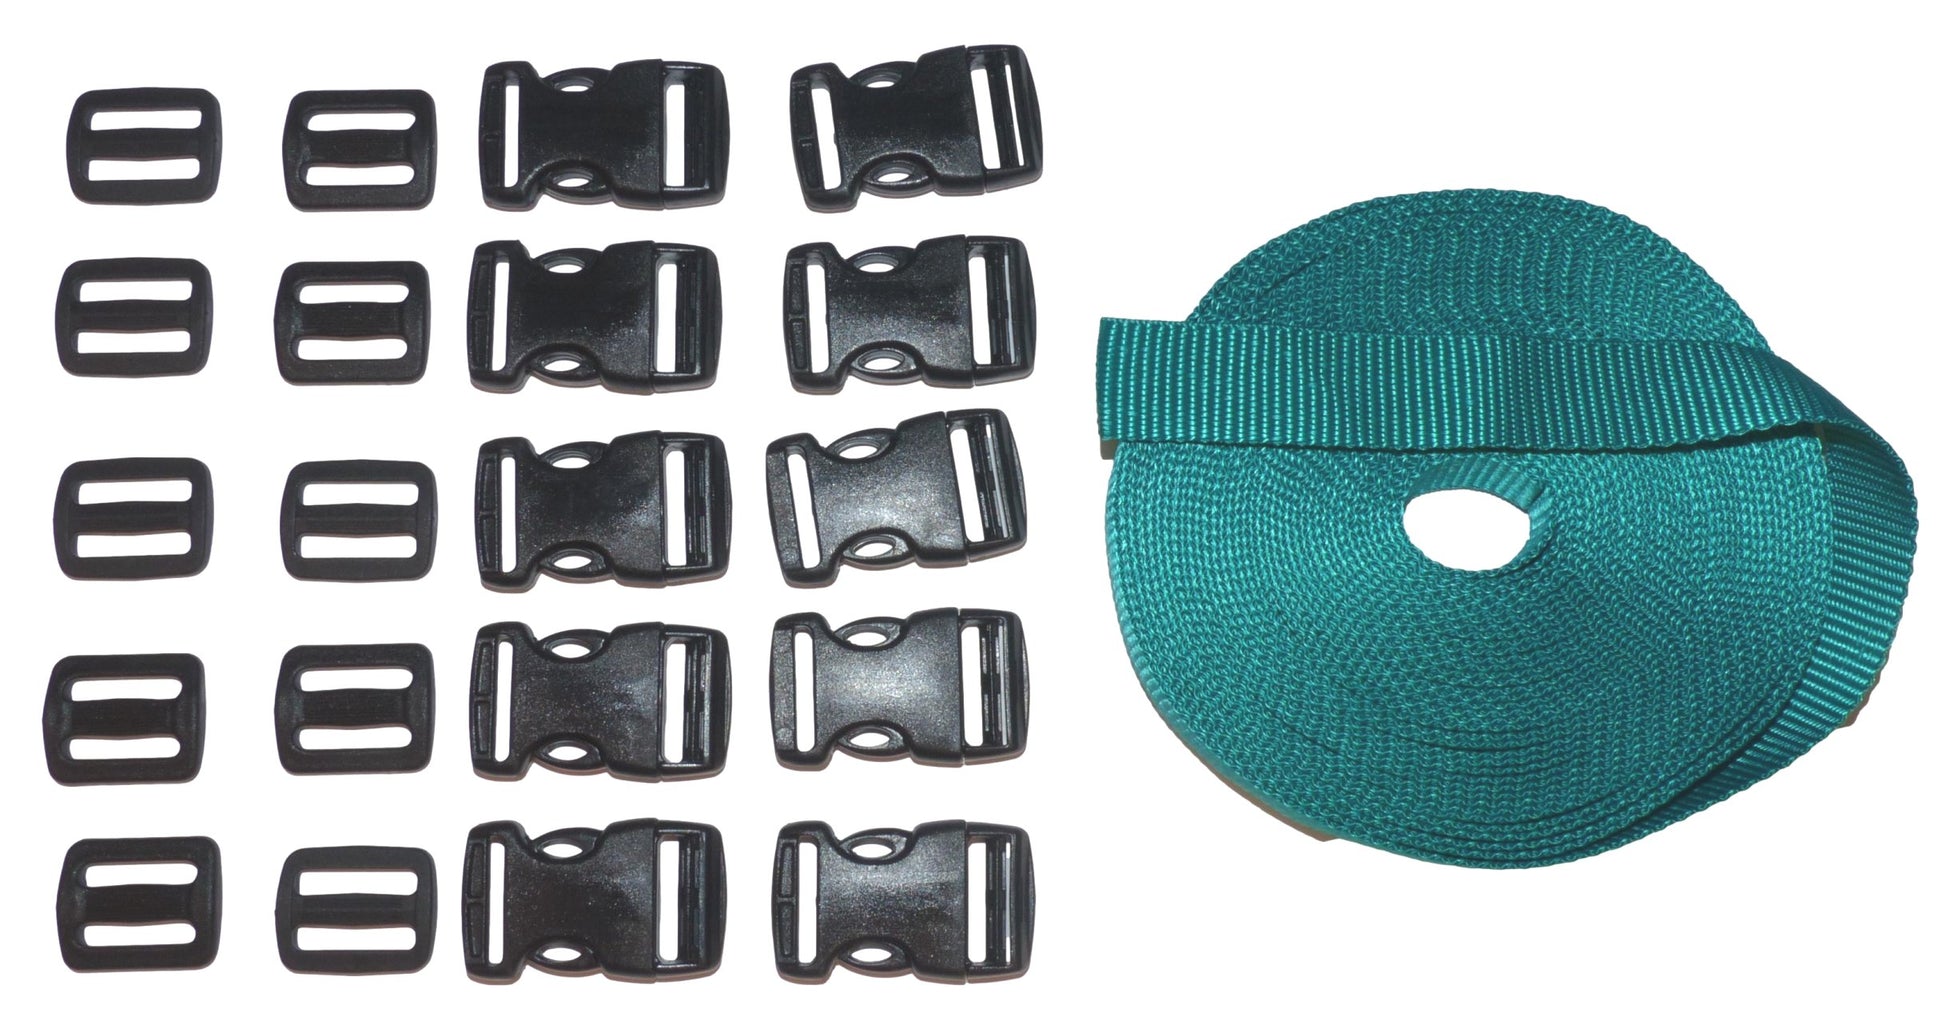 Benristraps 25mm Heavy-Duty Webbing and Branded  Buckle Sets for Straps, Bags, Crafts in emerald